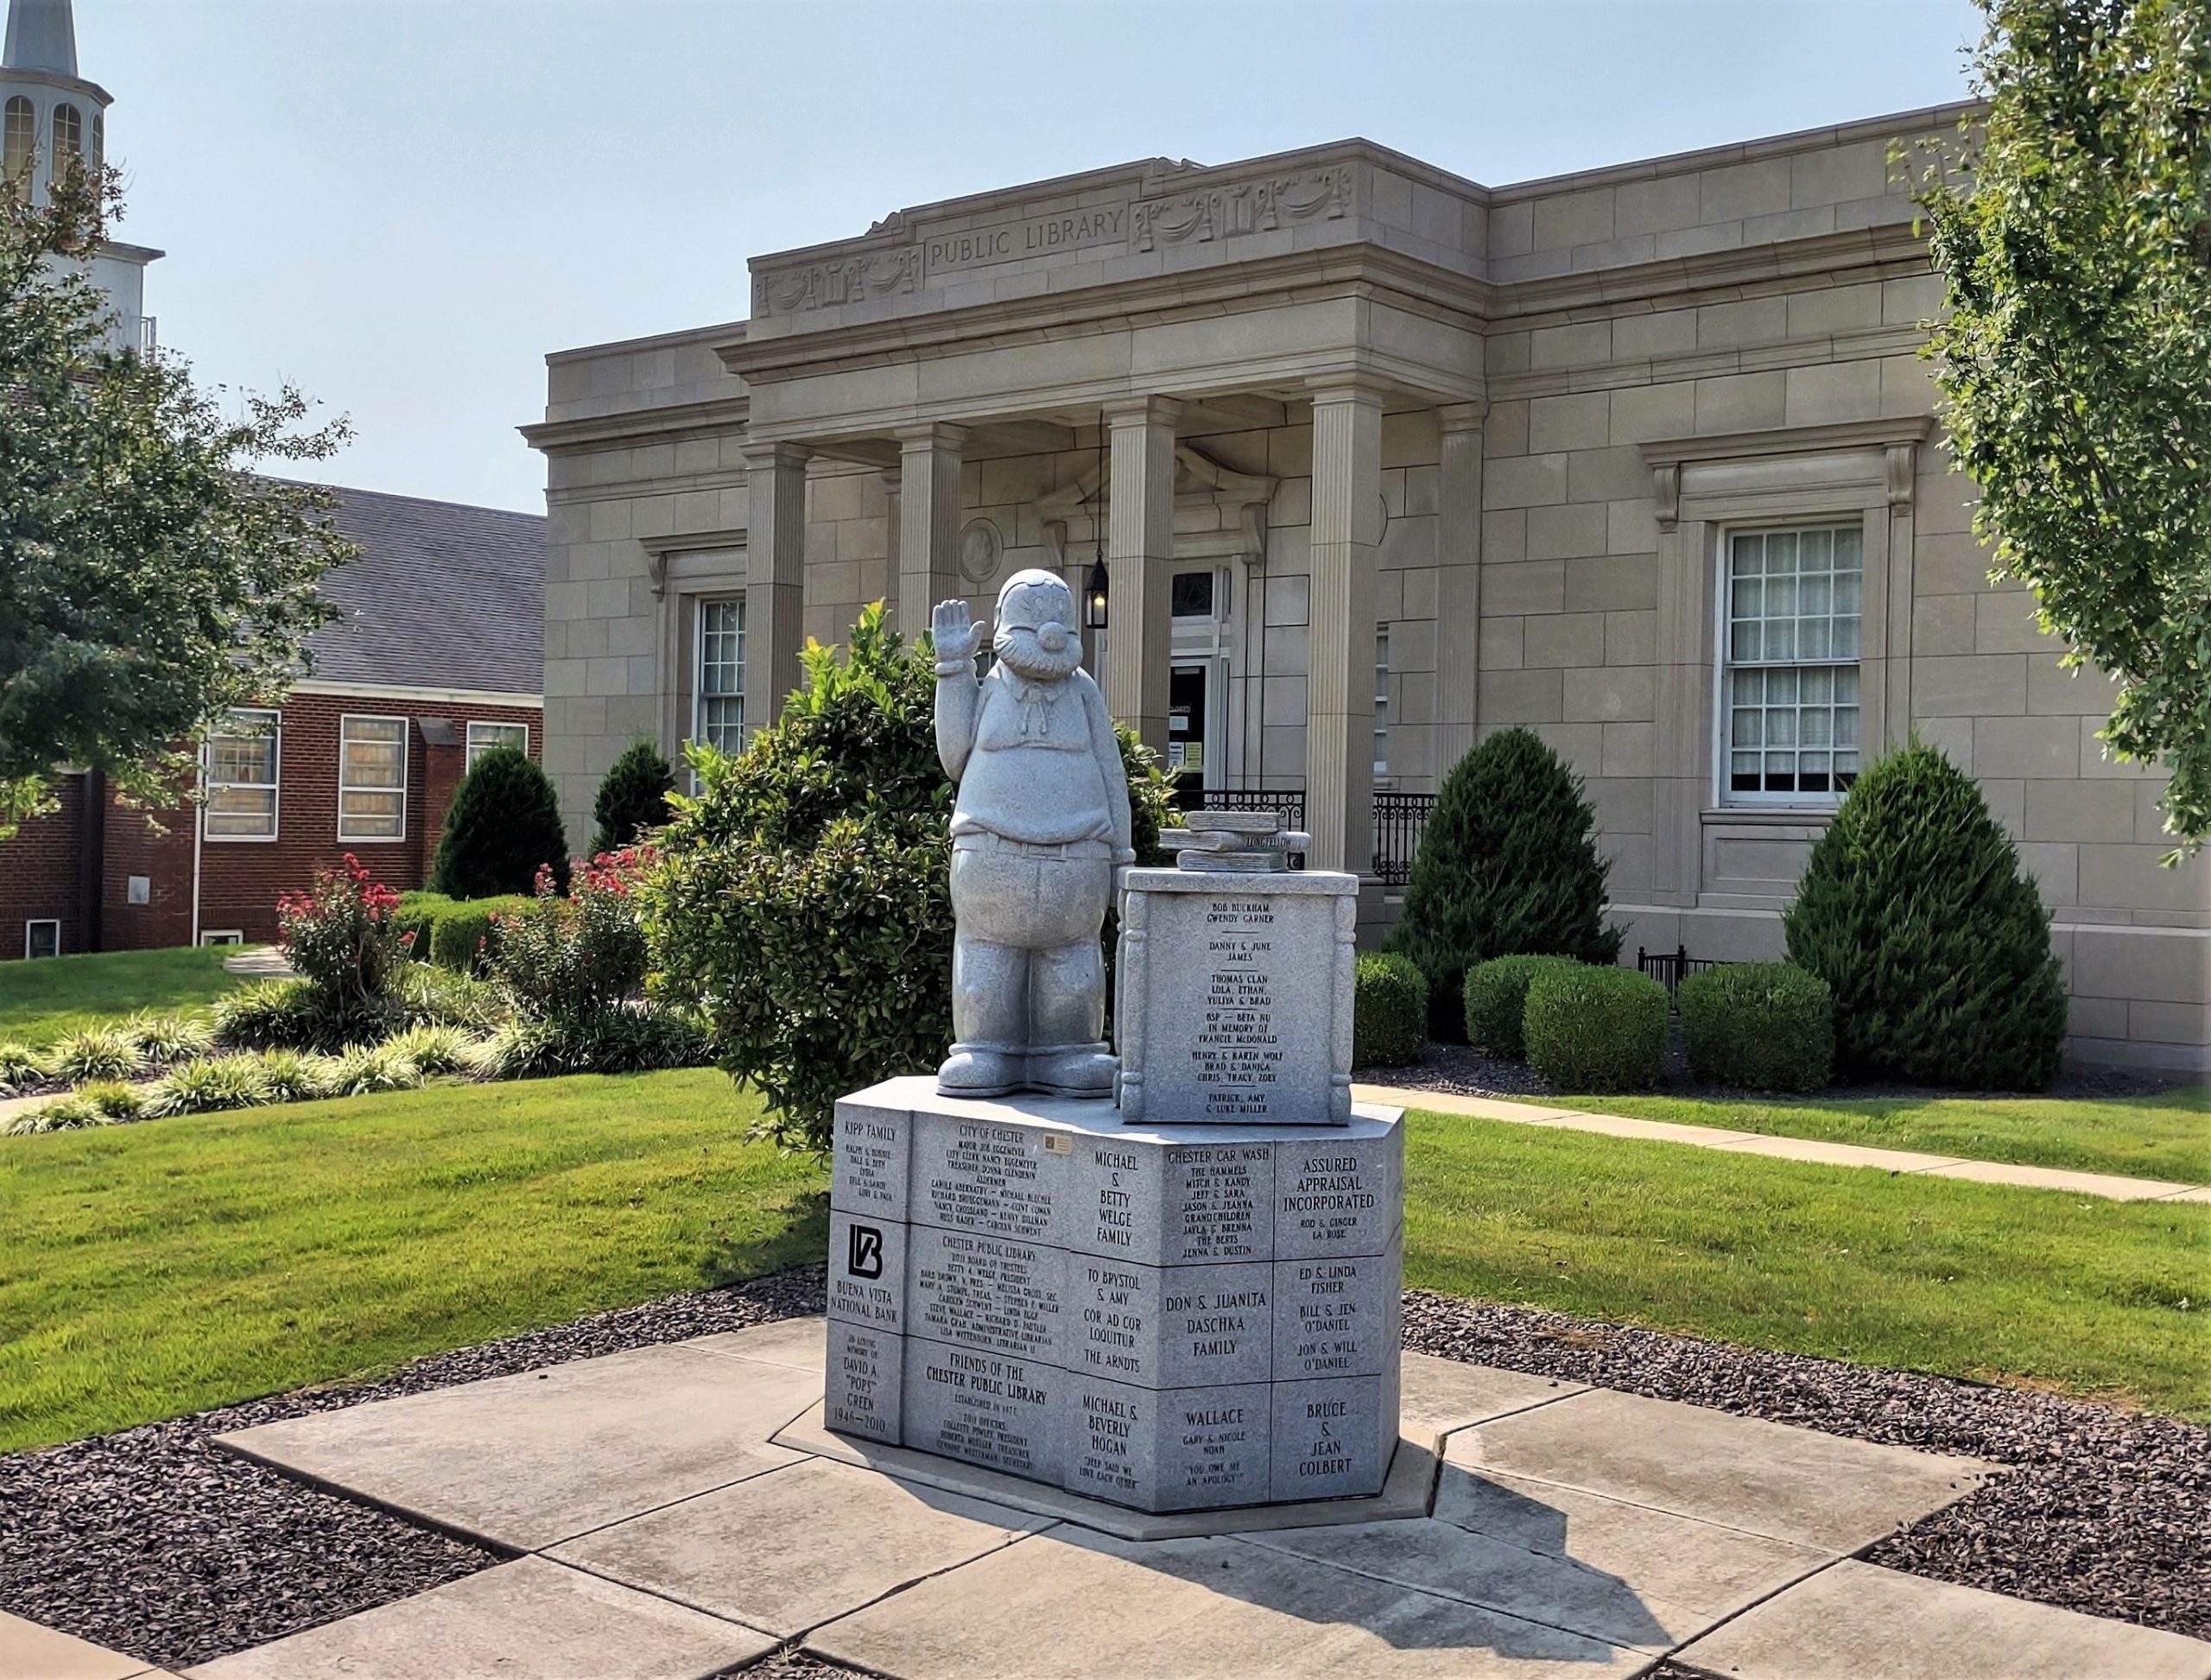 Photograph of a statue of Popeye cartoon character Cole Oyl on the grounds of Chester Public Library.